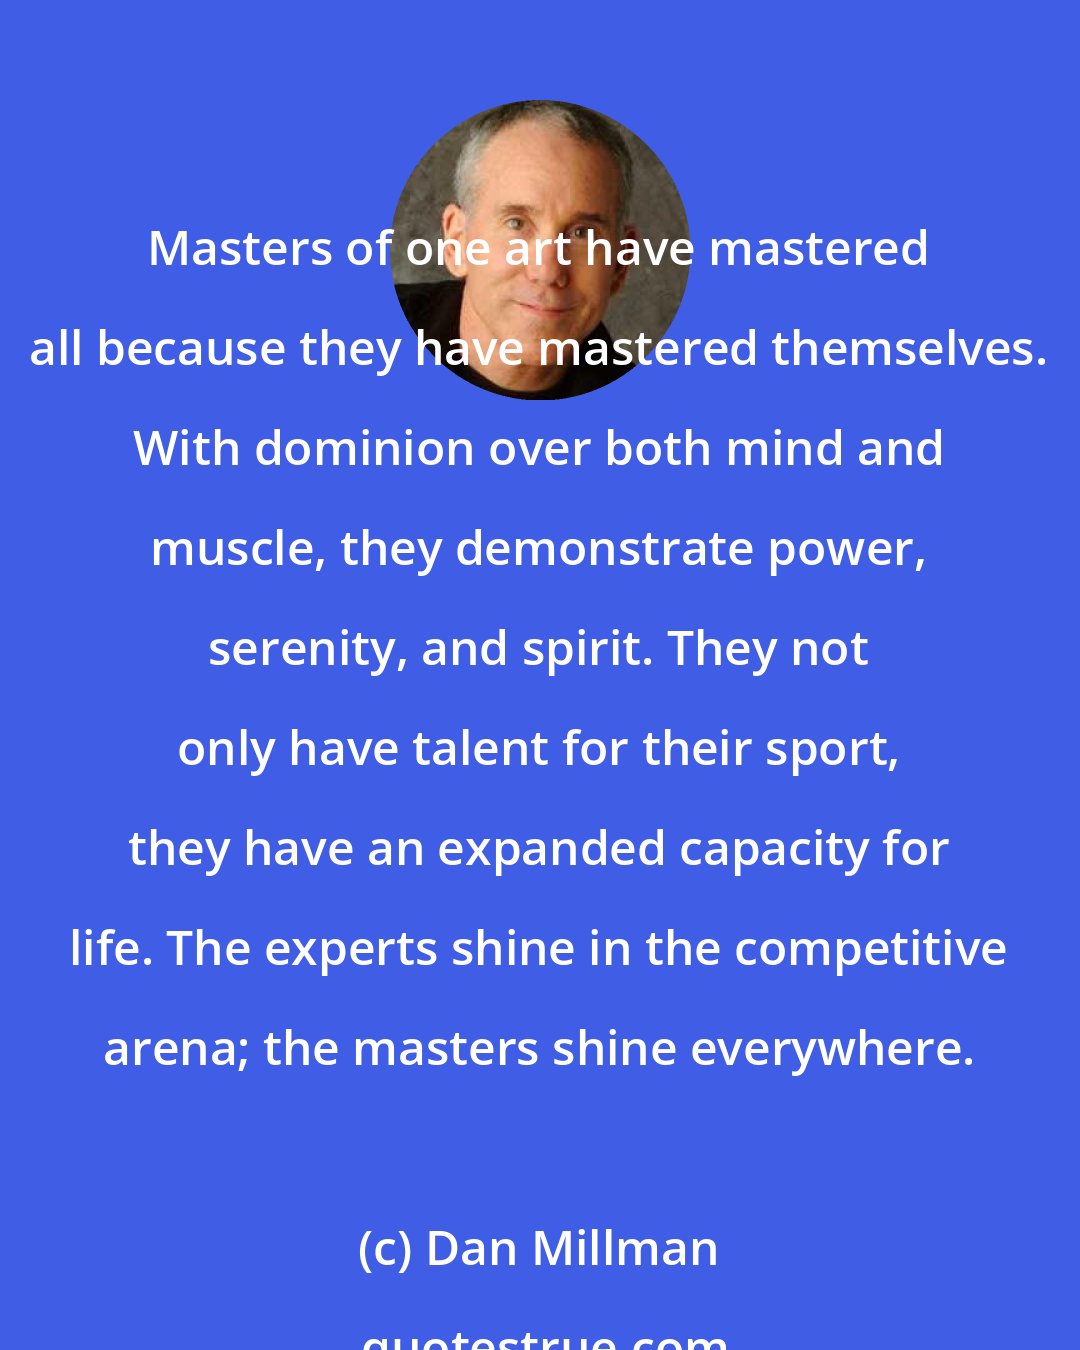 Dan Millman: Masters of one art have mastered all because they have mastered themselves. With dominion over both mind and muscle, they demonstrate power, serenity, and spirit. They not only have talent for their sport, they have an expanded capacity for life. The experts shine in the competitive arena; the masters shine everywhere.